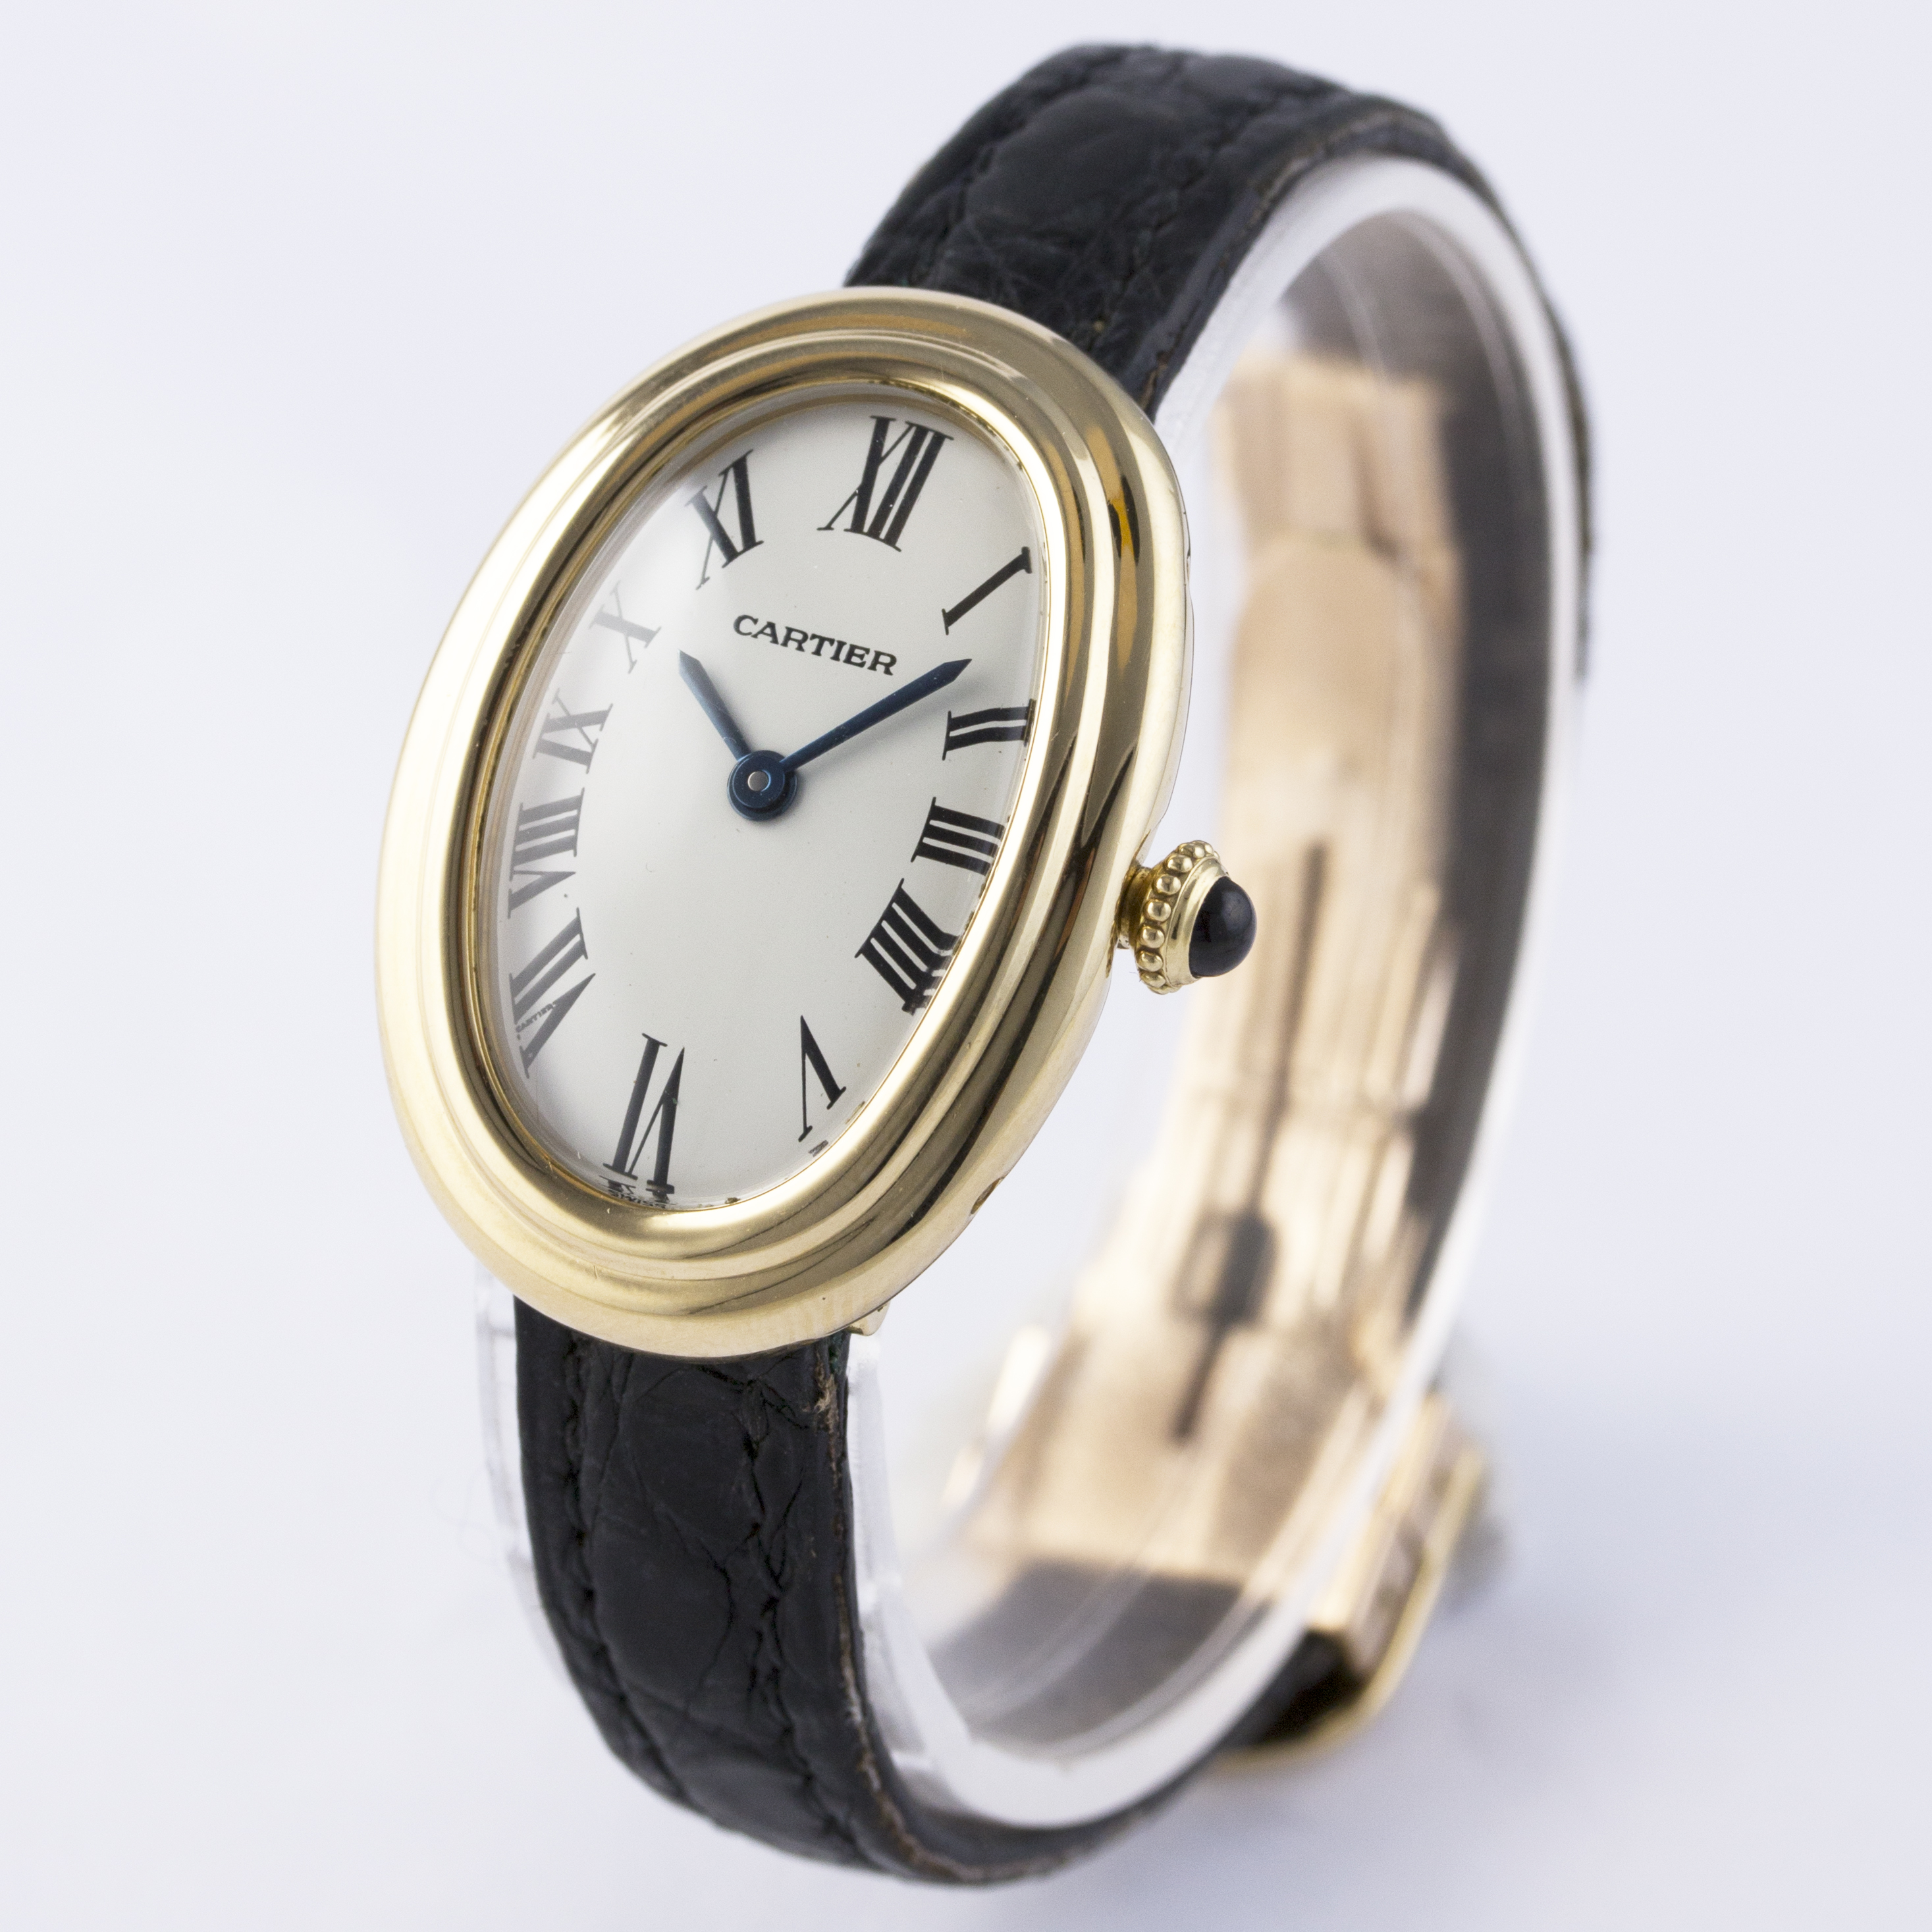 A FINE LADIES 18K SOLID GOLD CARTIER BAIGNOIRE WRIST WATCH CIRCA 1970s D: White dial with black - Image 3 of 7